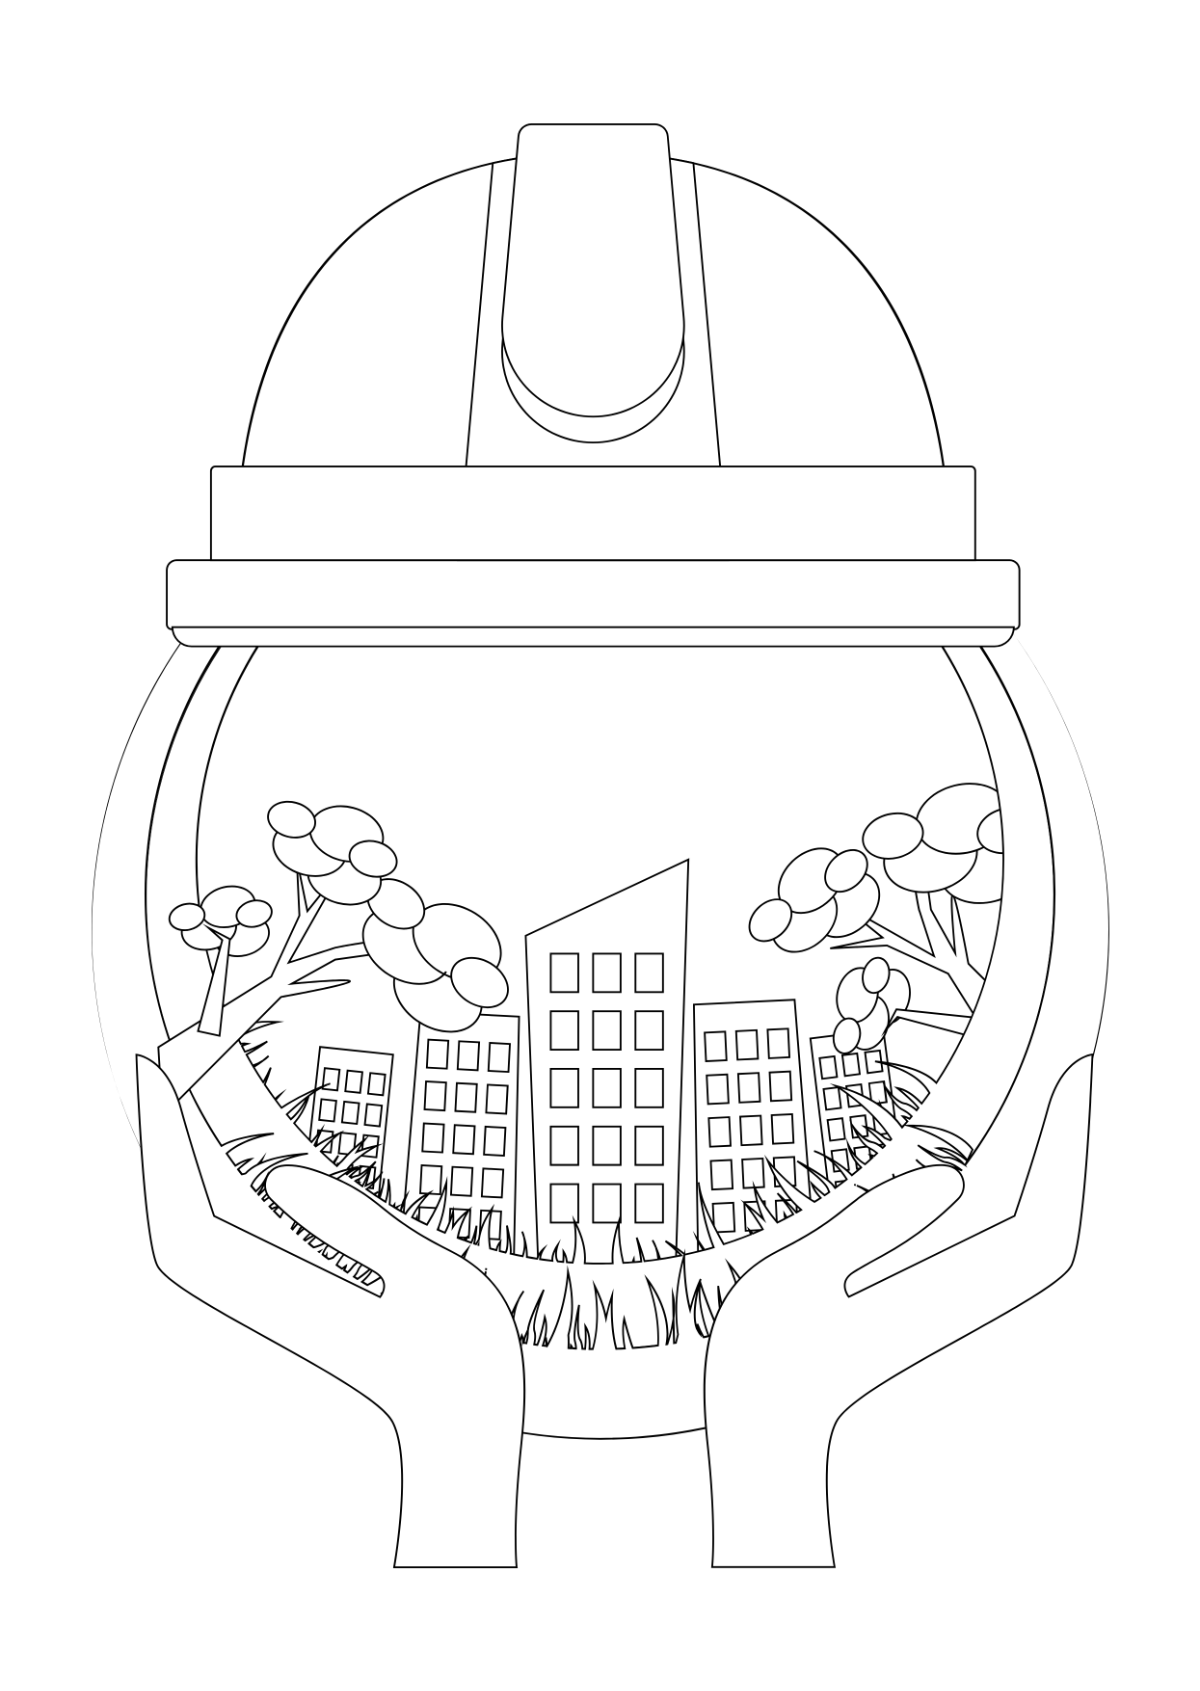 Free Environment Safety Drawing Template